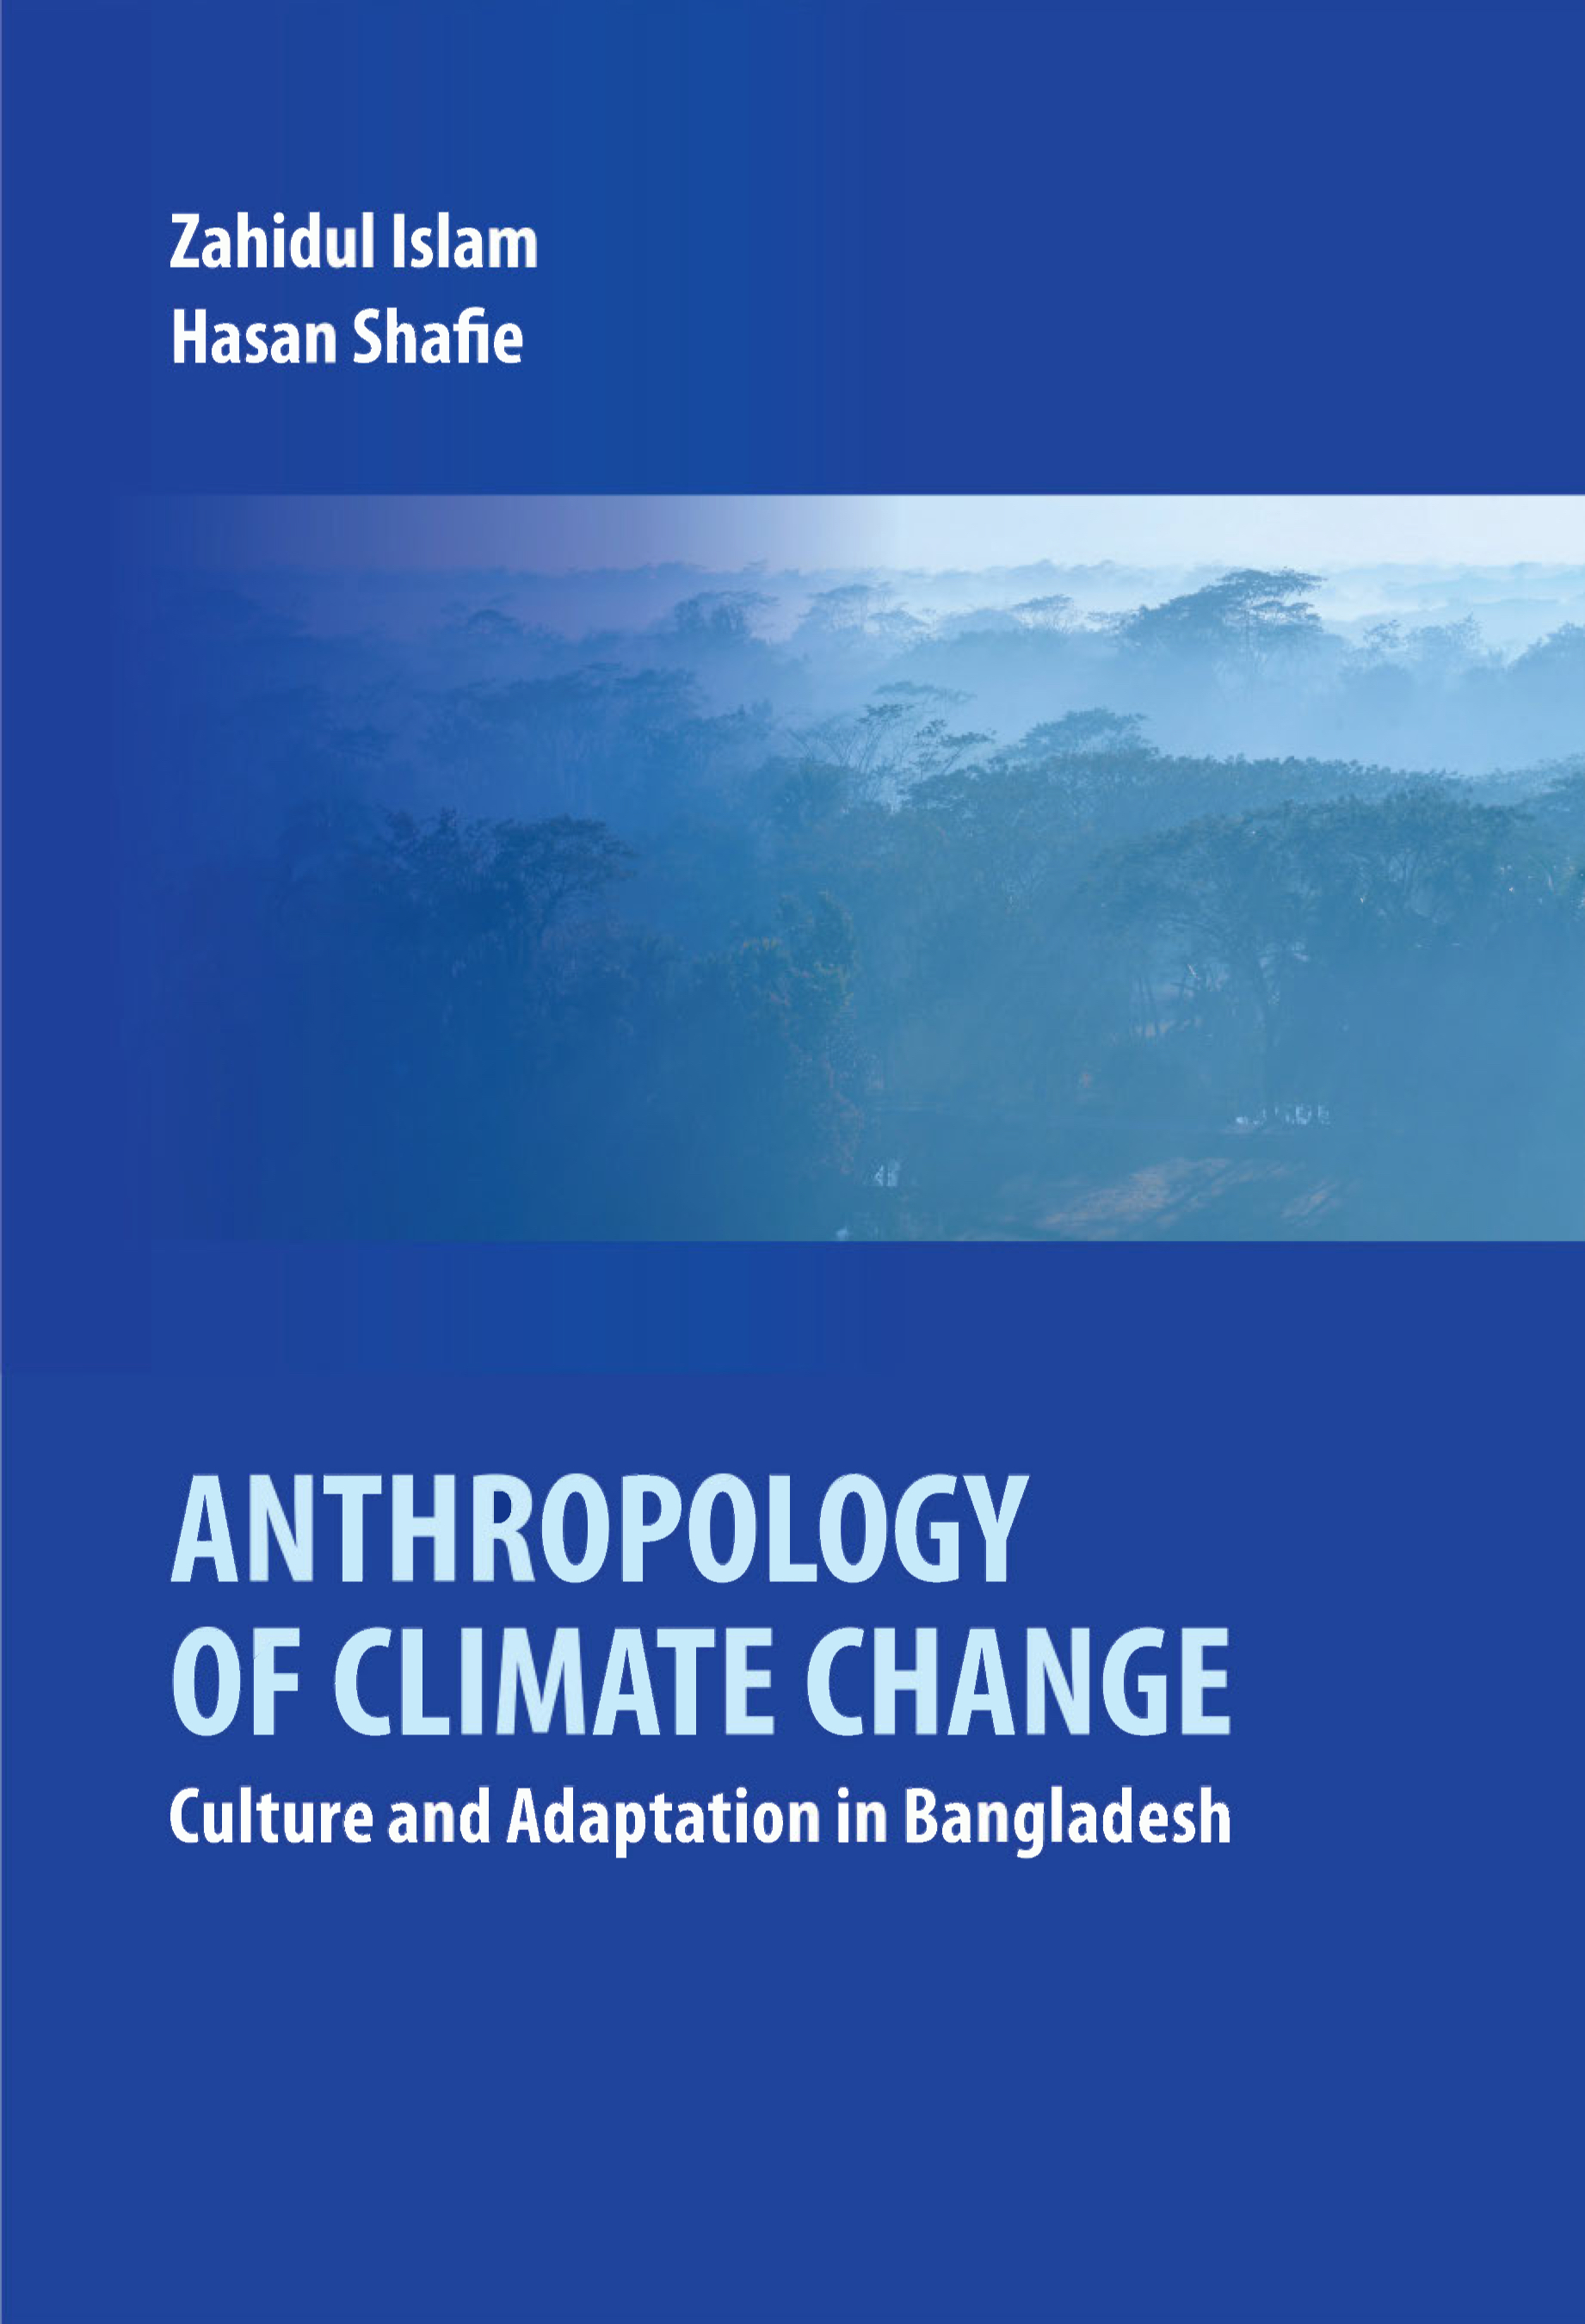 Anthropology of climate change